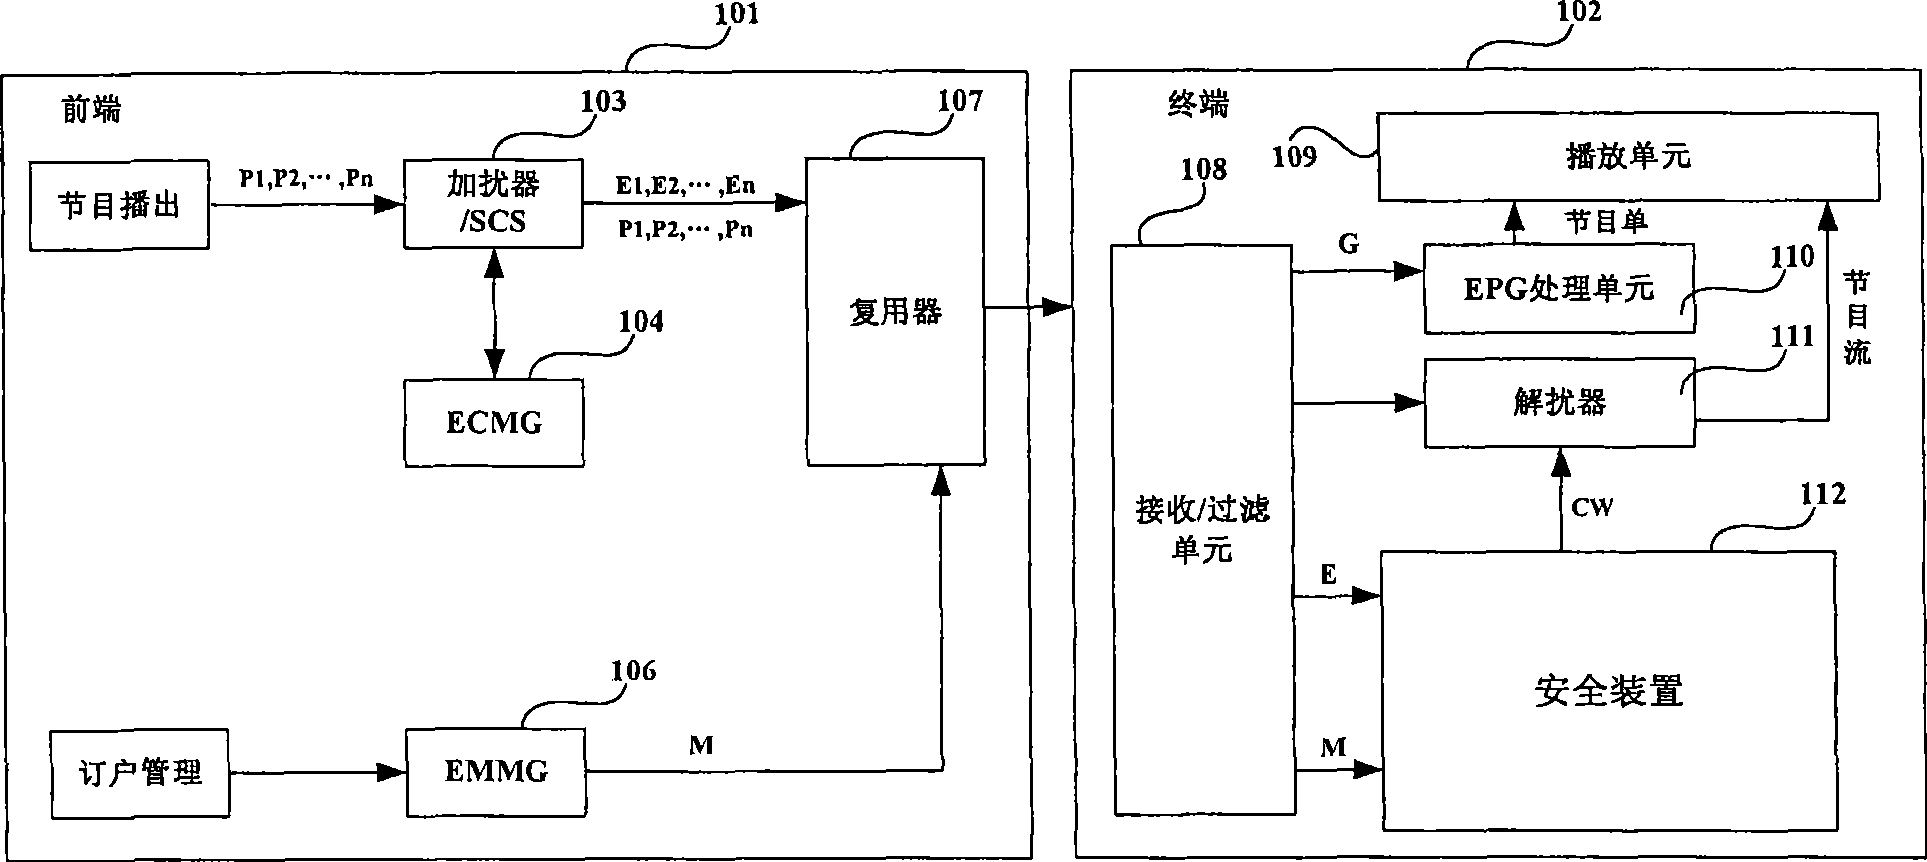 Browsing locking method of digital programs, digital television terminal and safety device